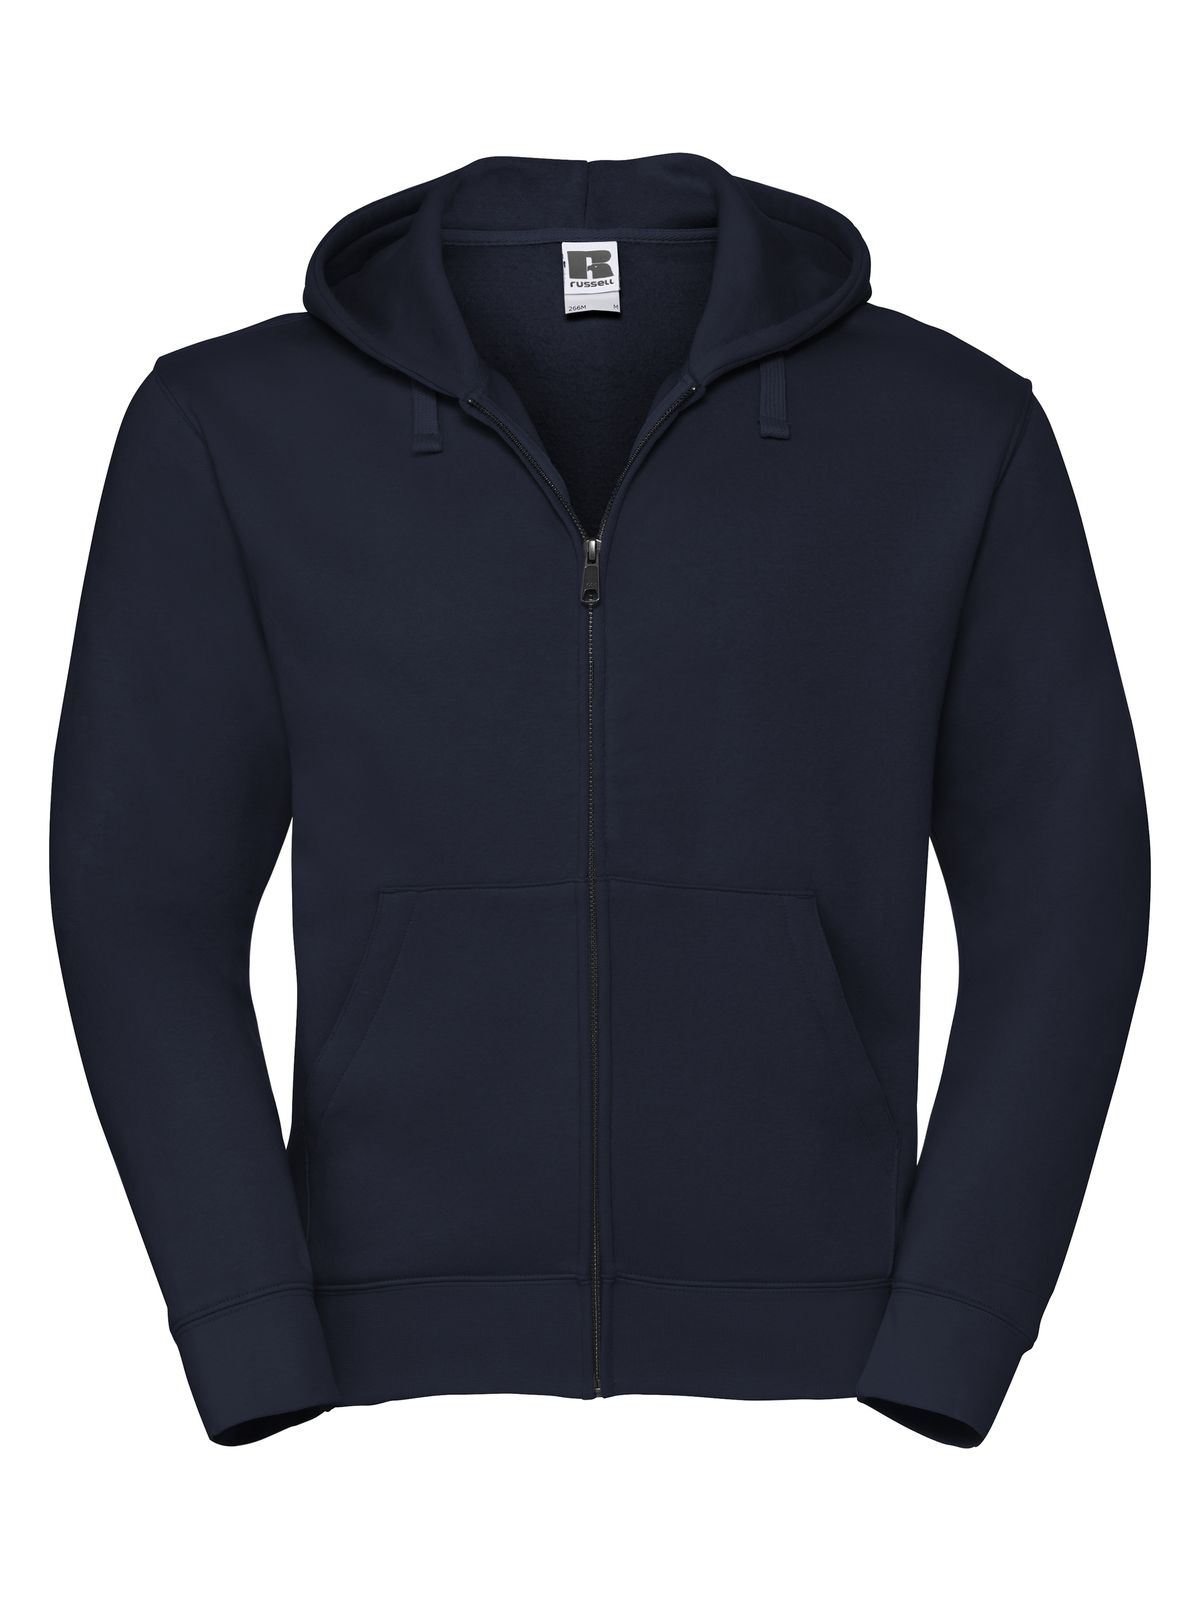 mens-authentic-zipped-hood-french-navy.webp